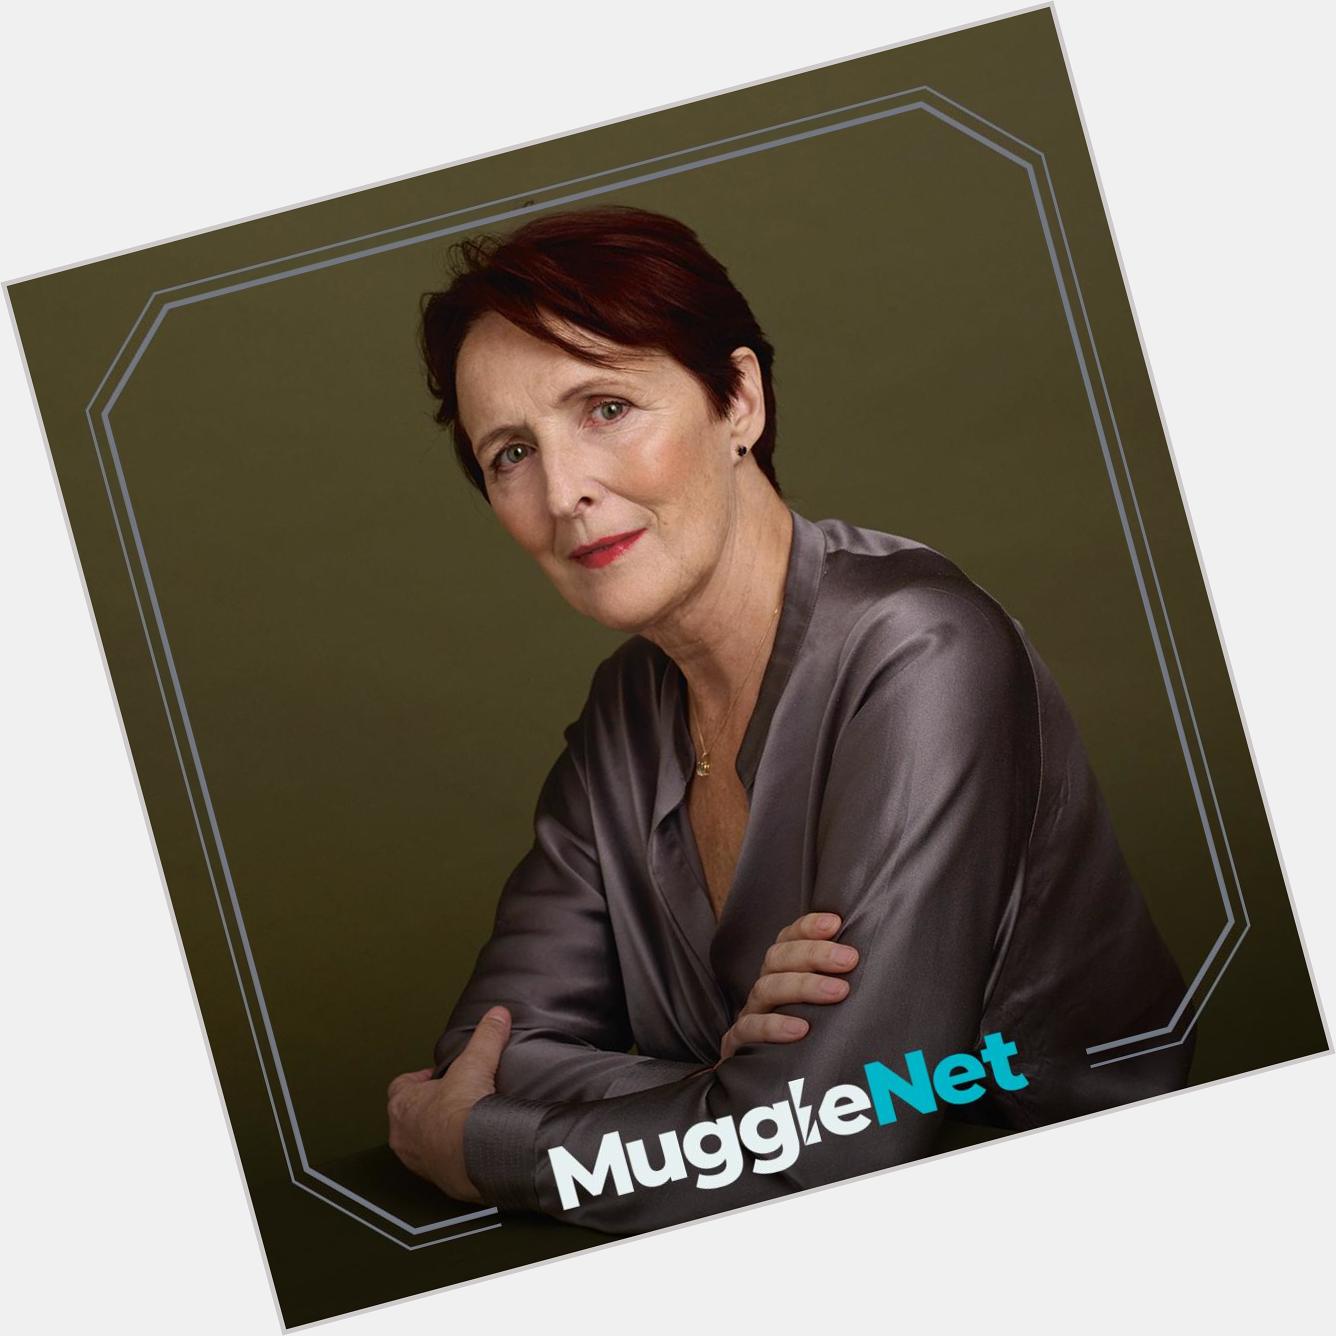 Happy birthday to the incomparable Fiona Shaw, who portrayed Petunia Dursley in the films! 